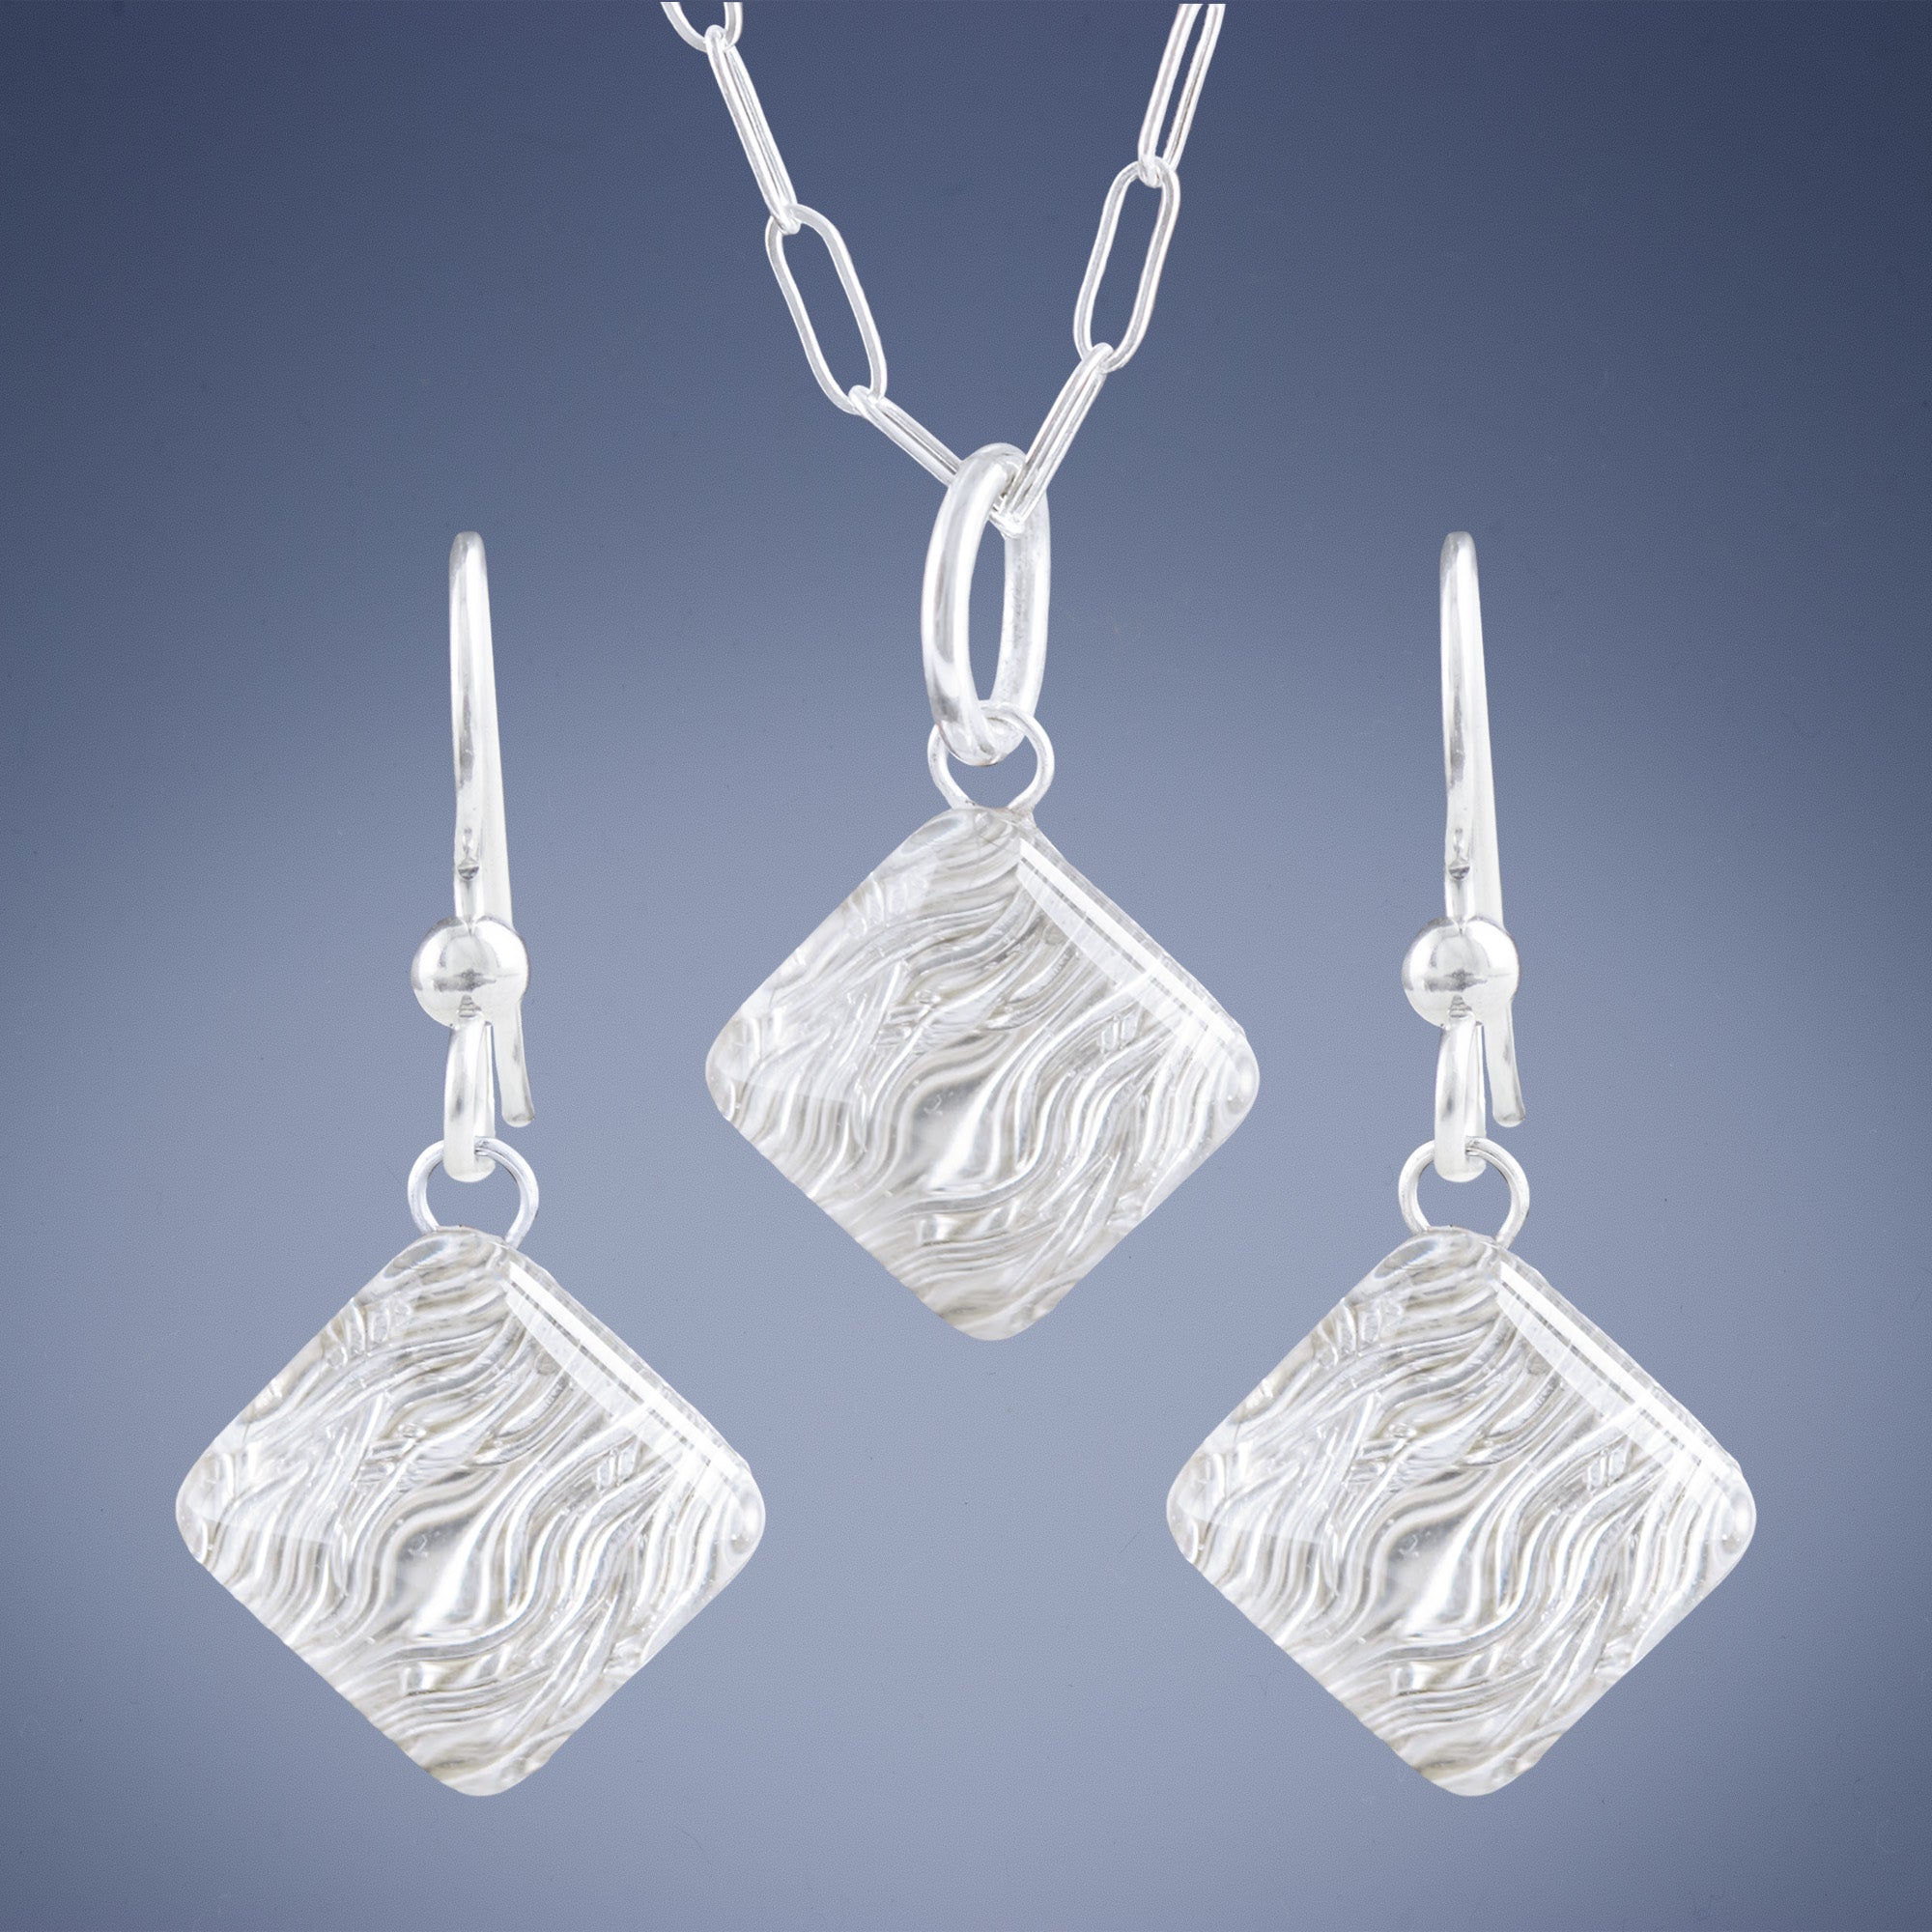 Sparkly Silver Pyramid Shaped Earring and Pendant Gift Set Featuring Handwoven Metal Fabric and Glass